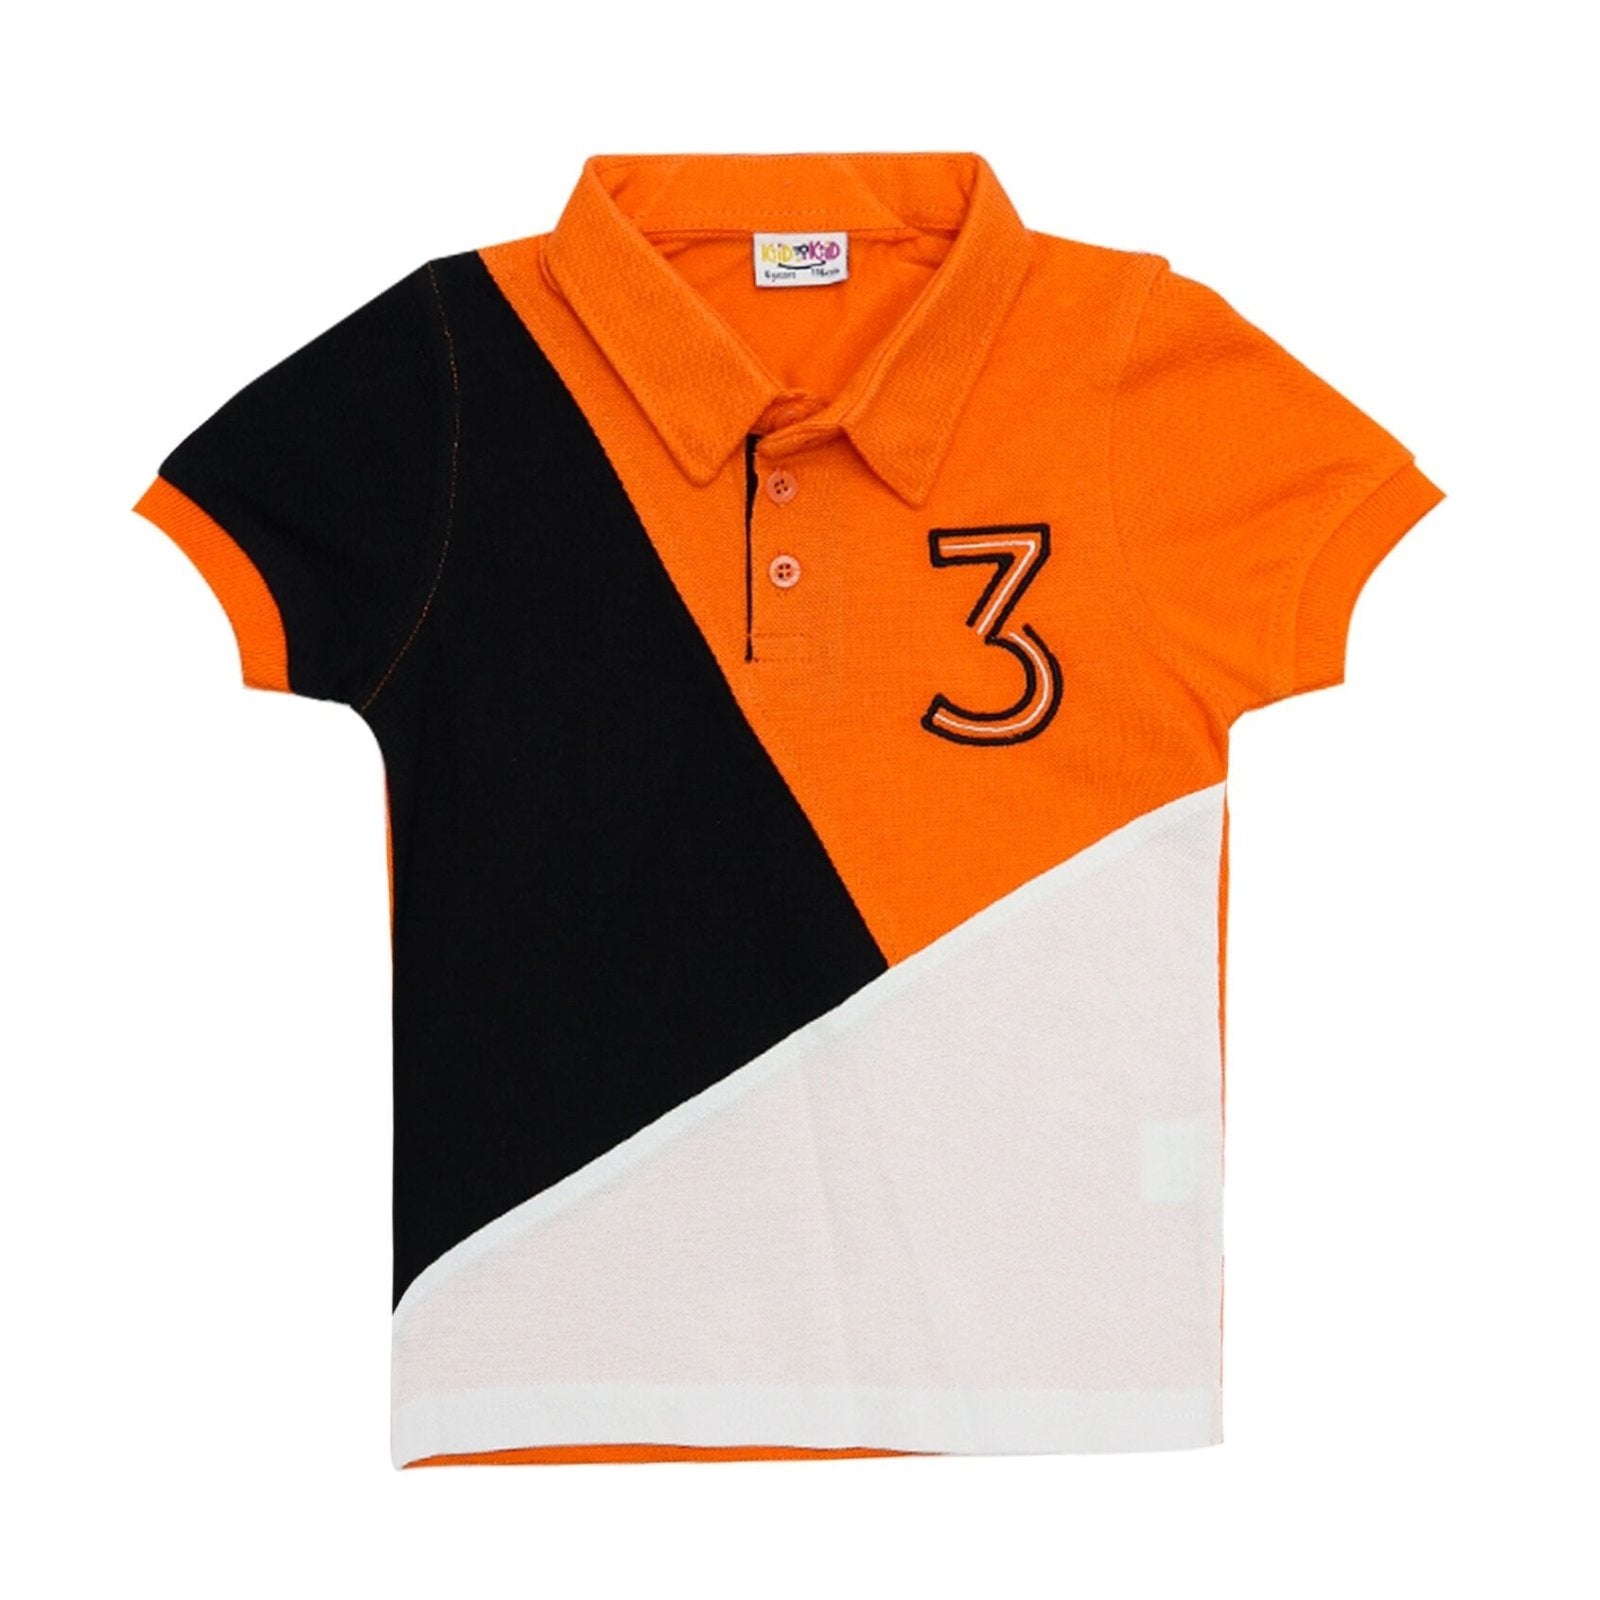 Boys T-Shirt Orange Color by Made in Turkey